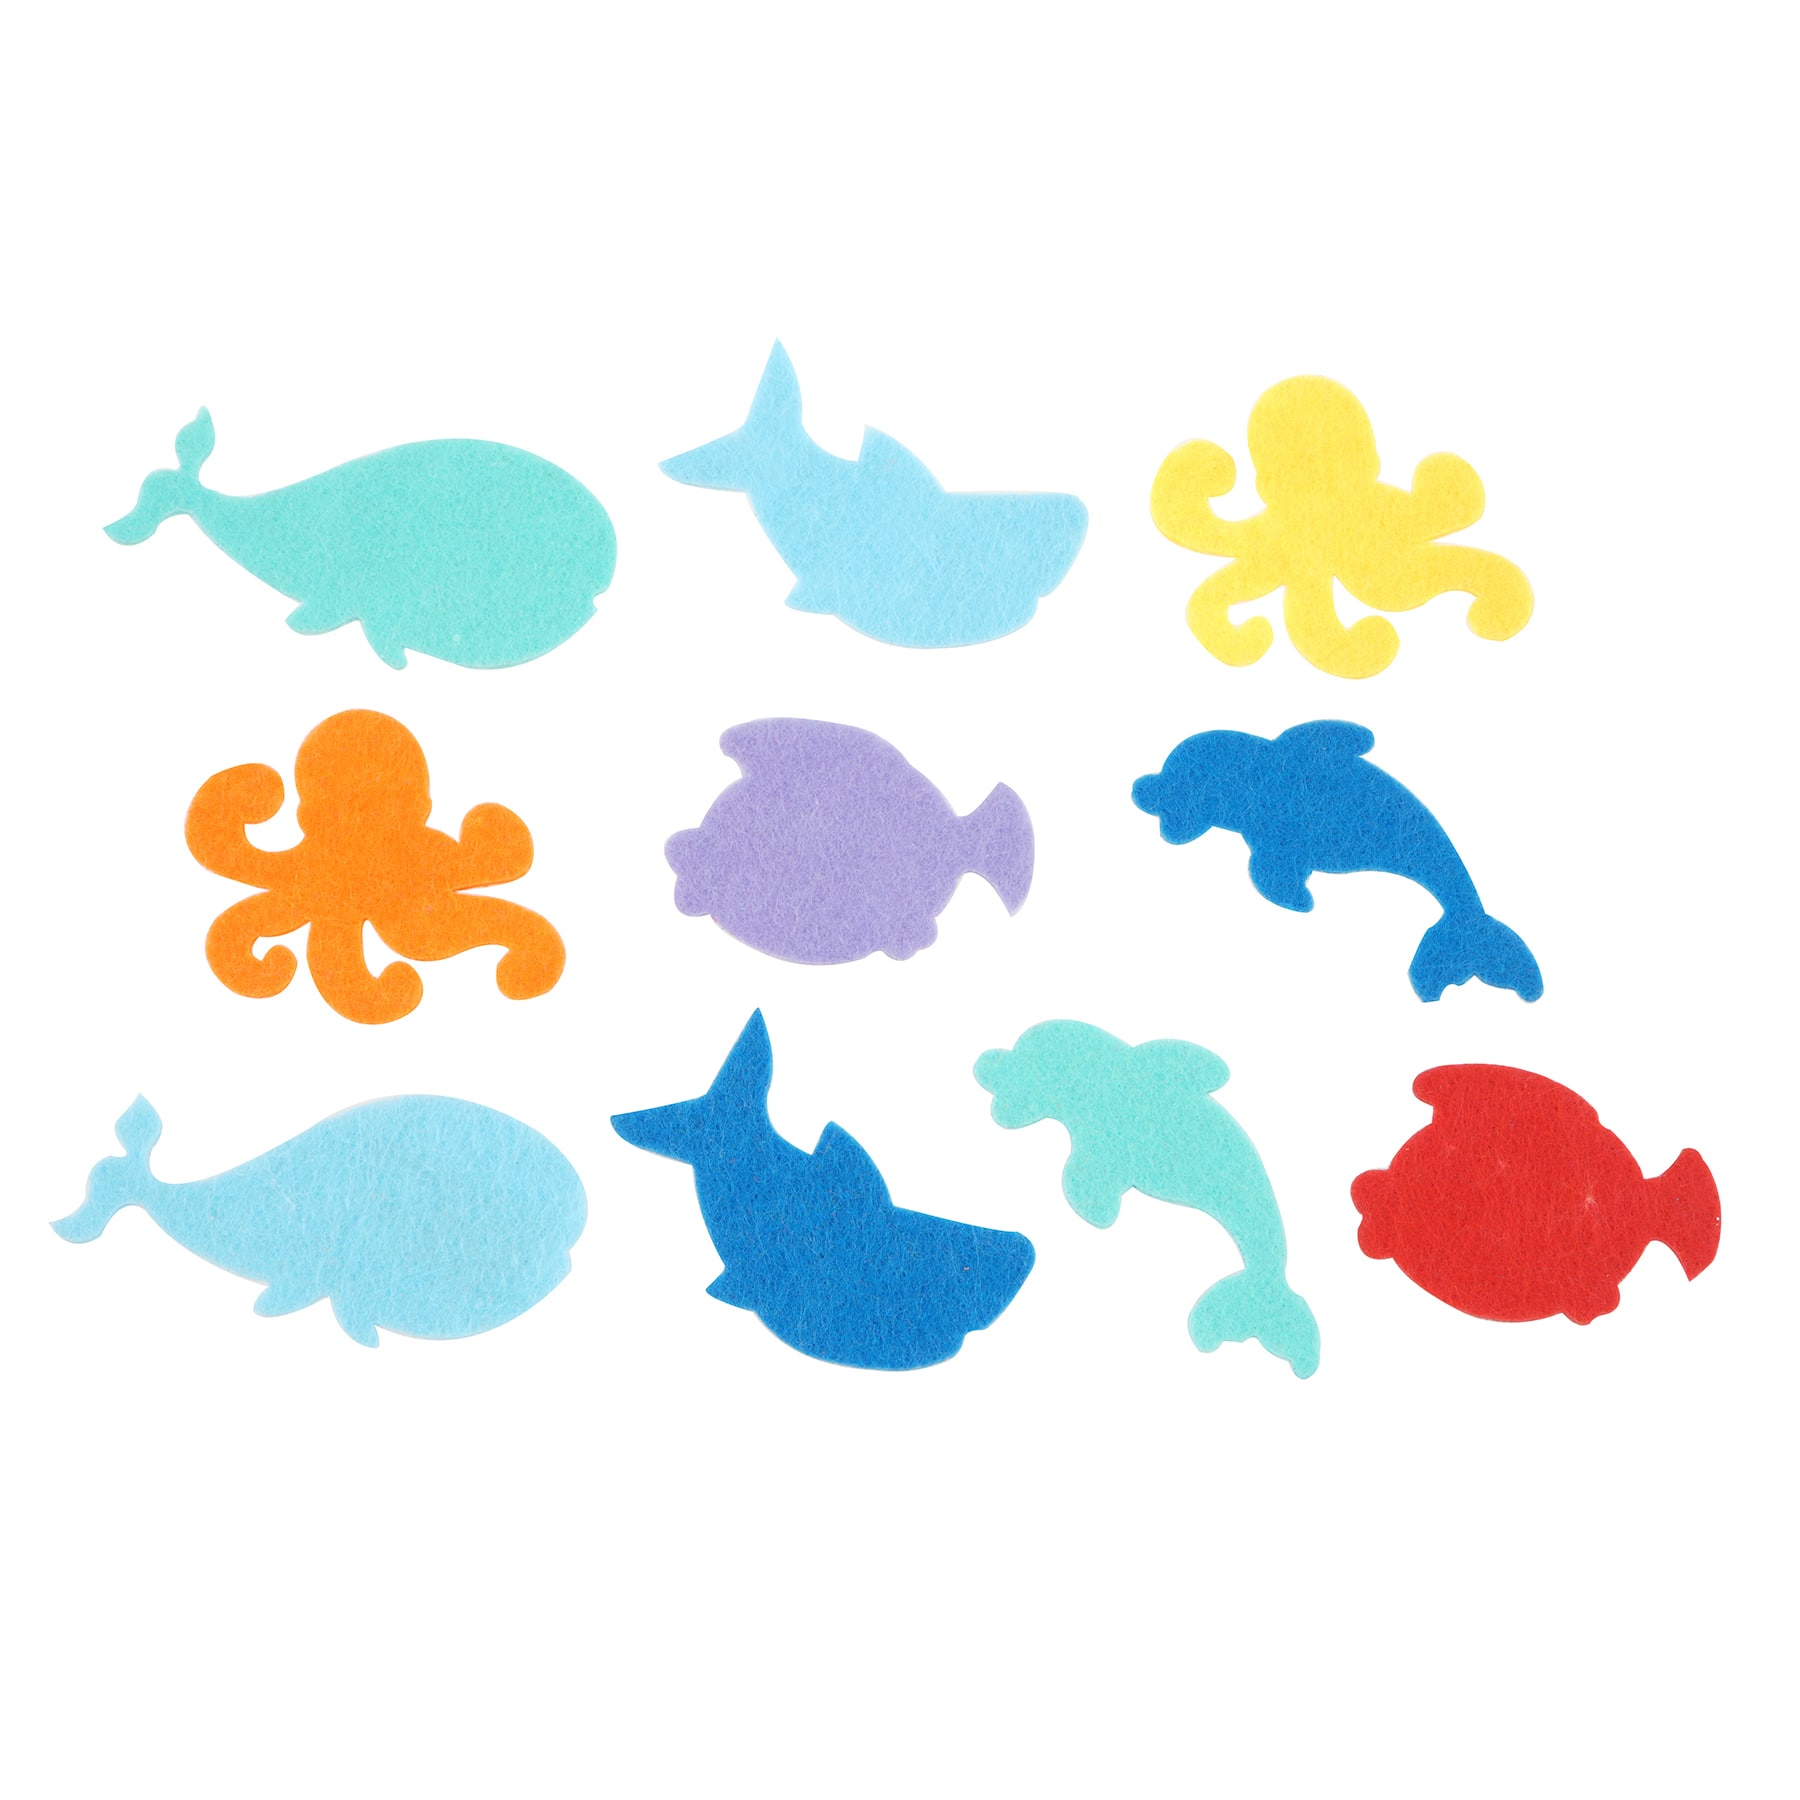 12 Packs: 50 ct. (600 total) Felt Sea Animals Shapes Scrap Pack by Creatology&#x2122;